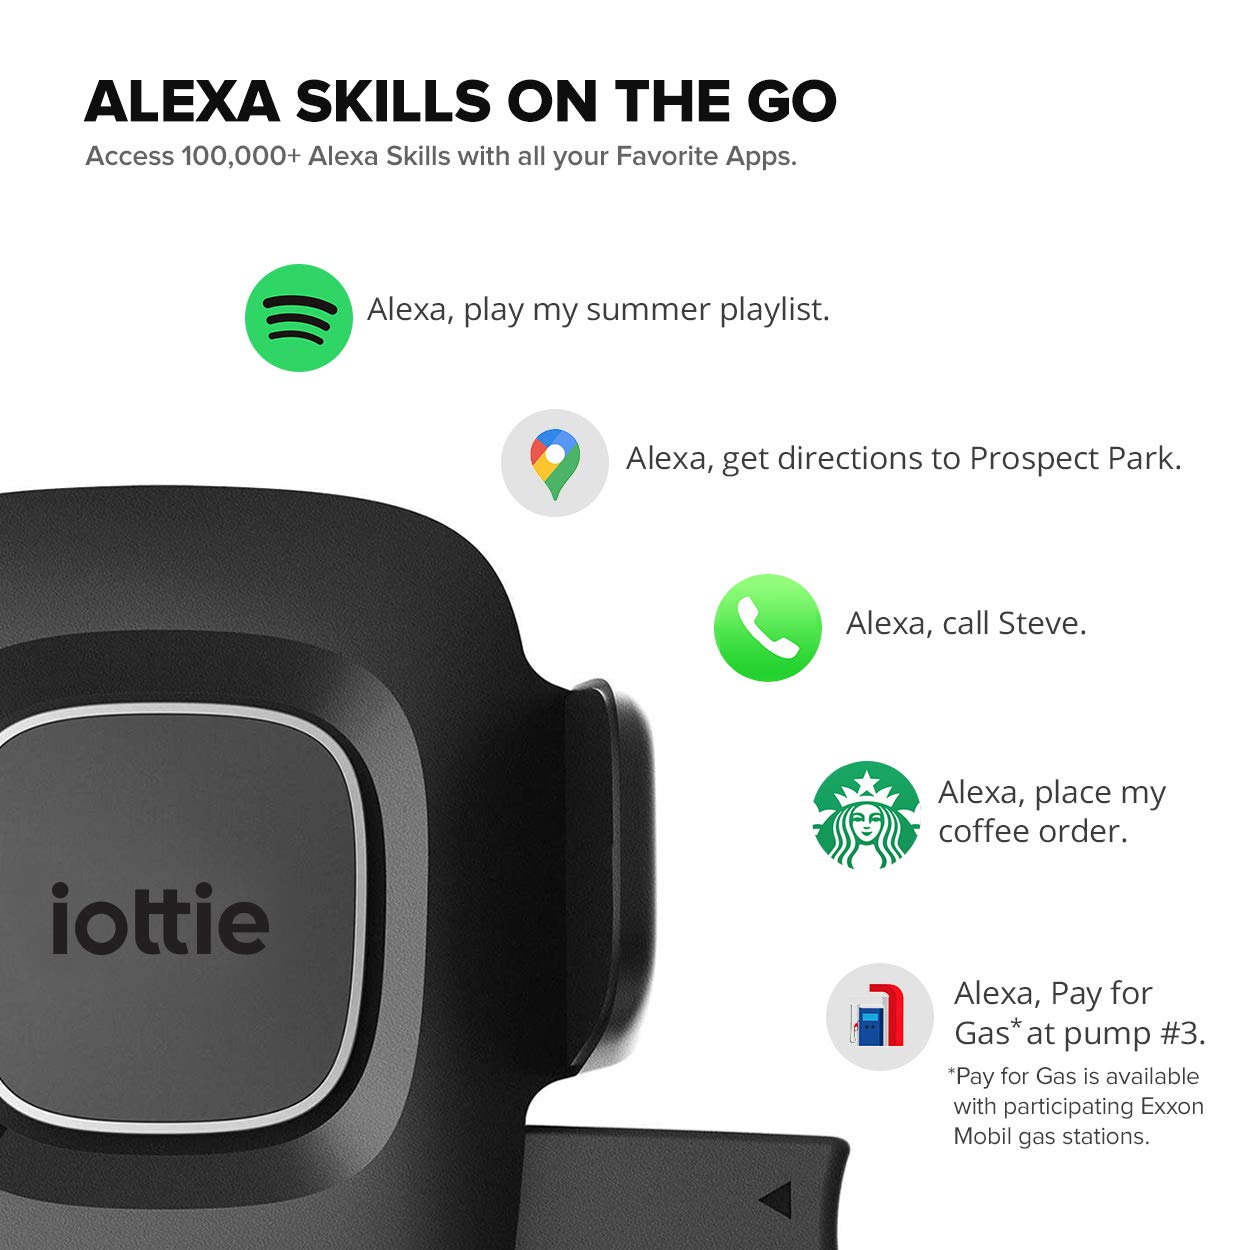 iOttie Easy One Touch Connect Pro (New) - Gen 2 - Hands Free Alexa in Your Car - Car Mount Phone Holder with Alexa Built in for iOS & Android, MFi Certified, Universal